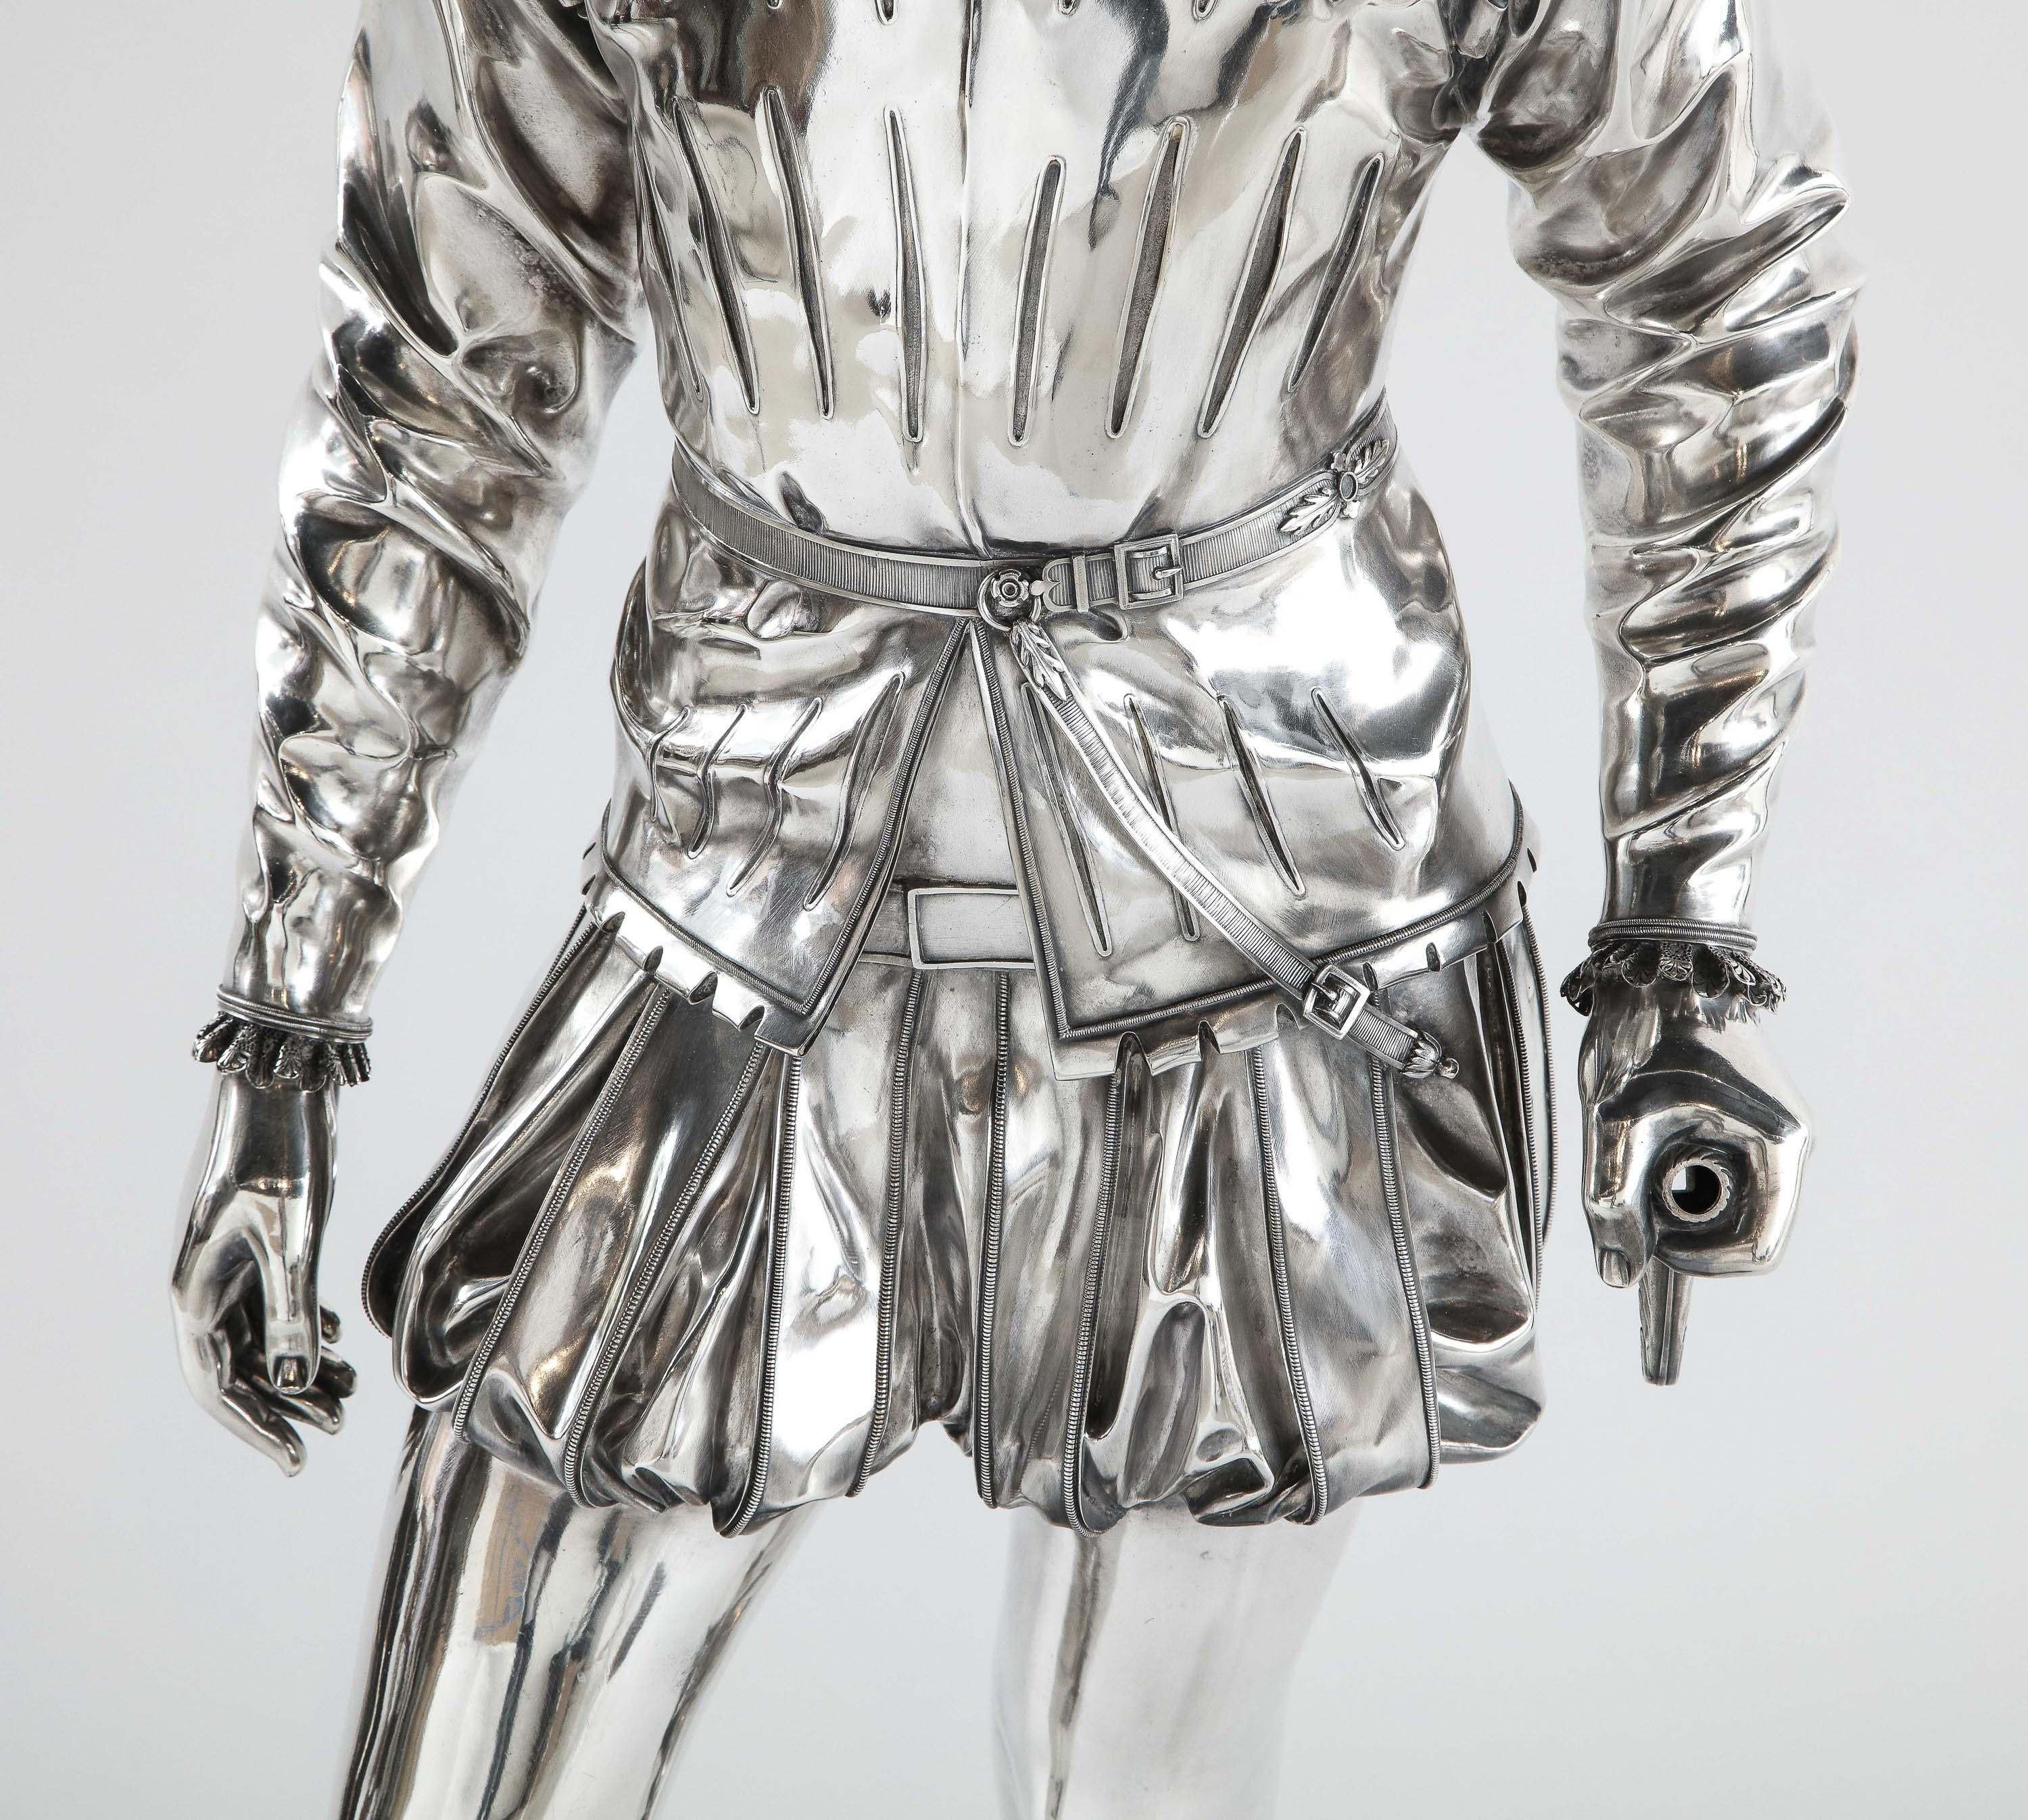 19th Century F. Barbedienne, a Life-Size Silvered Bronze of King Henri IV Enfant as a Child